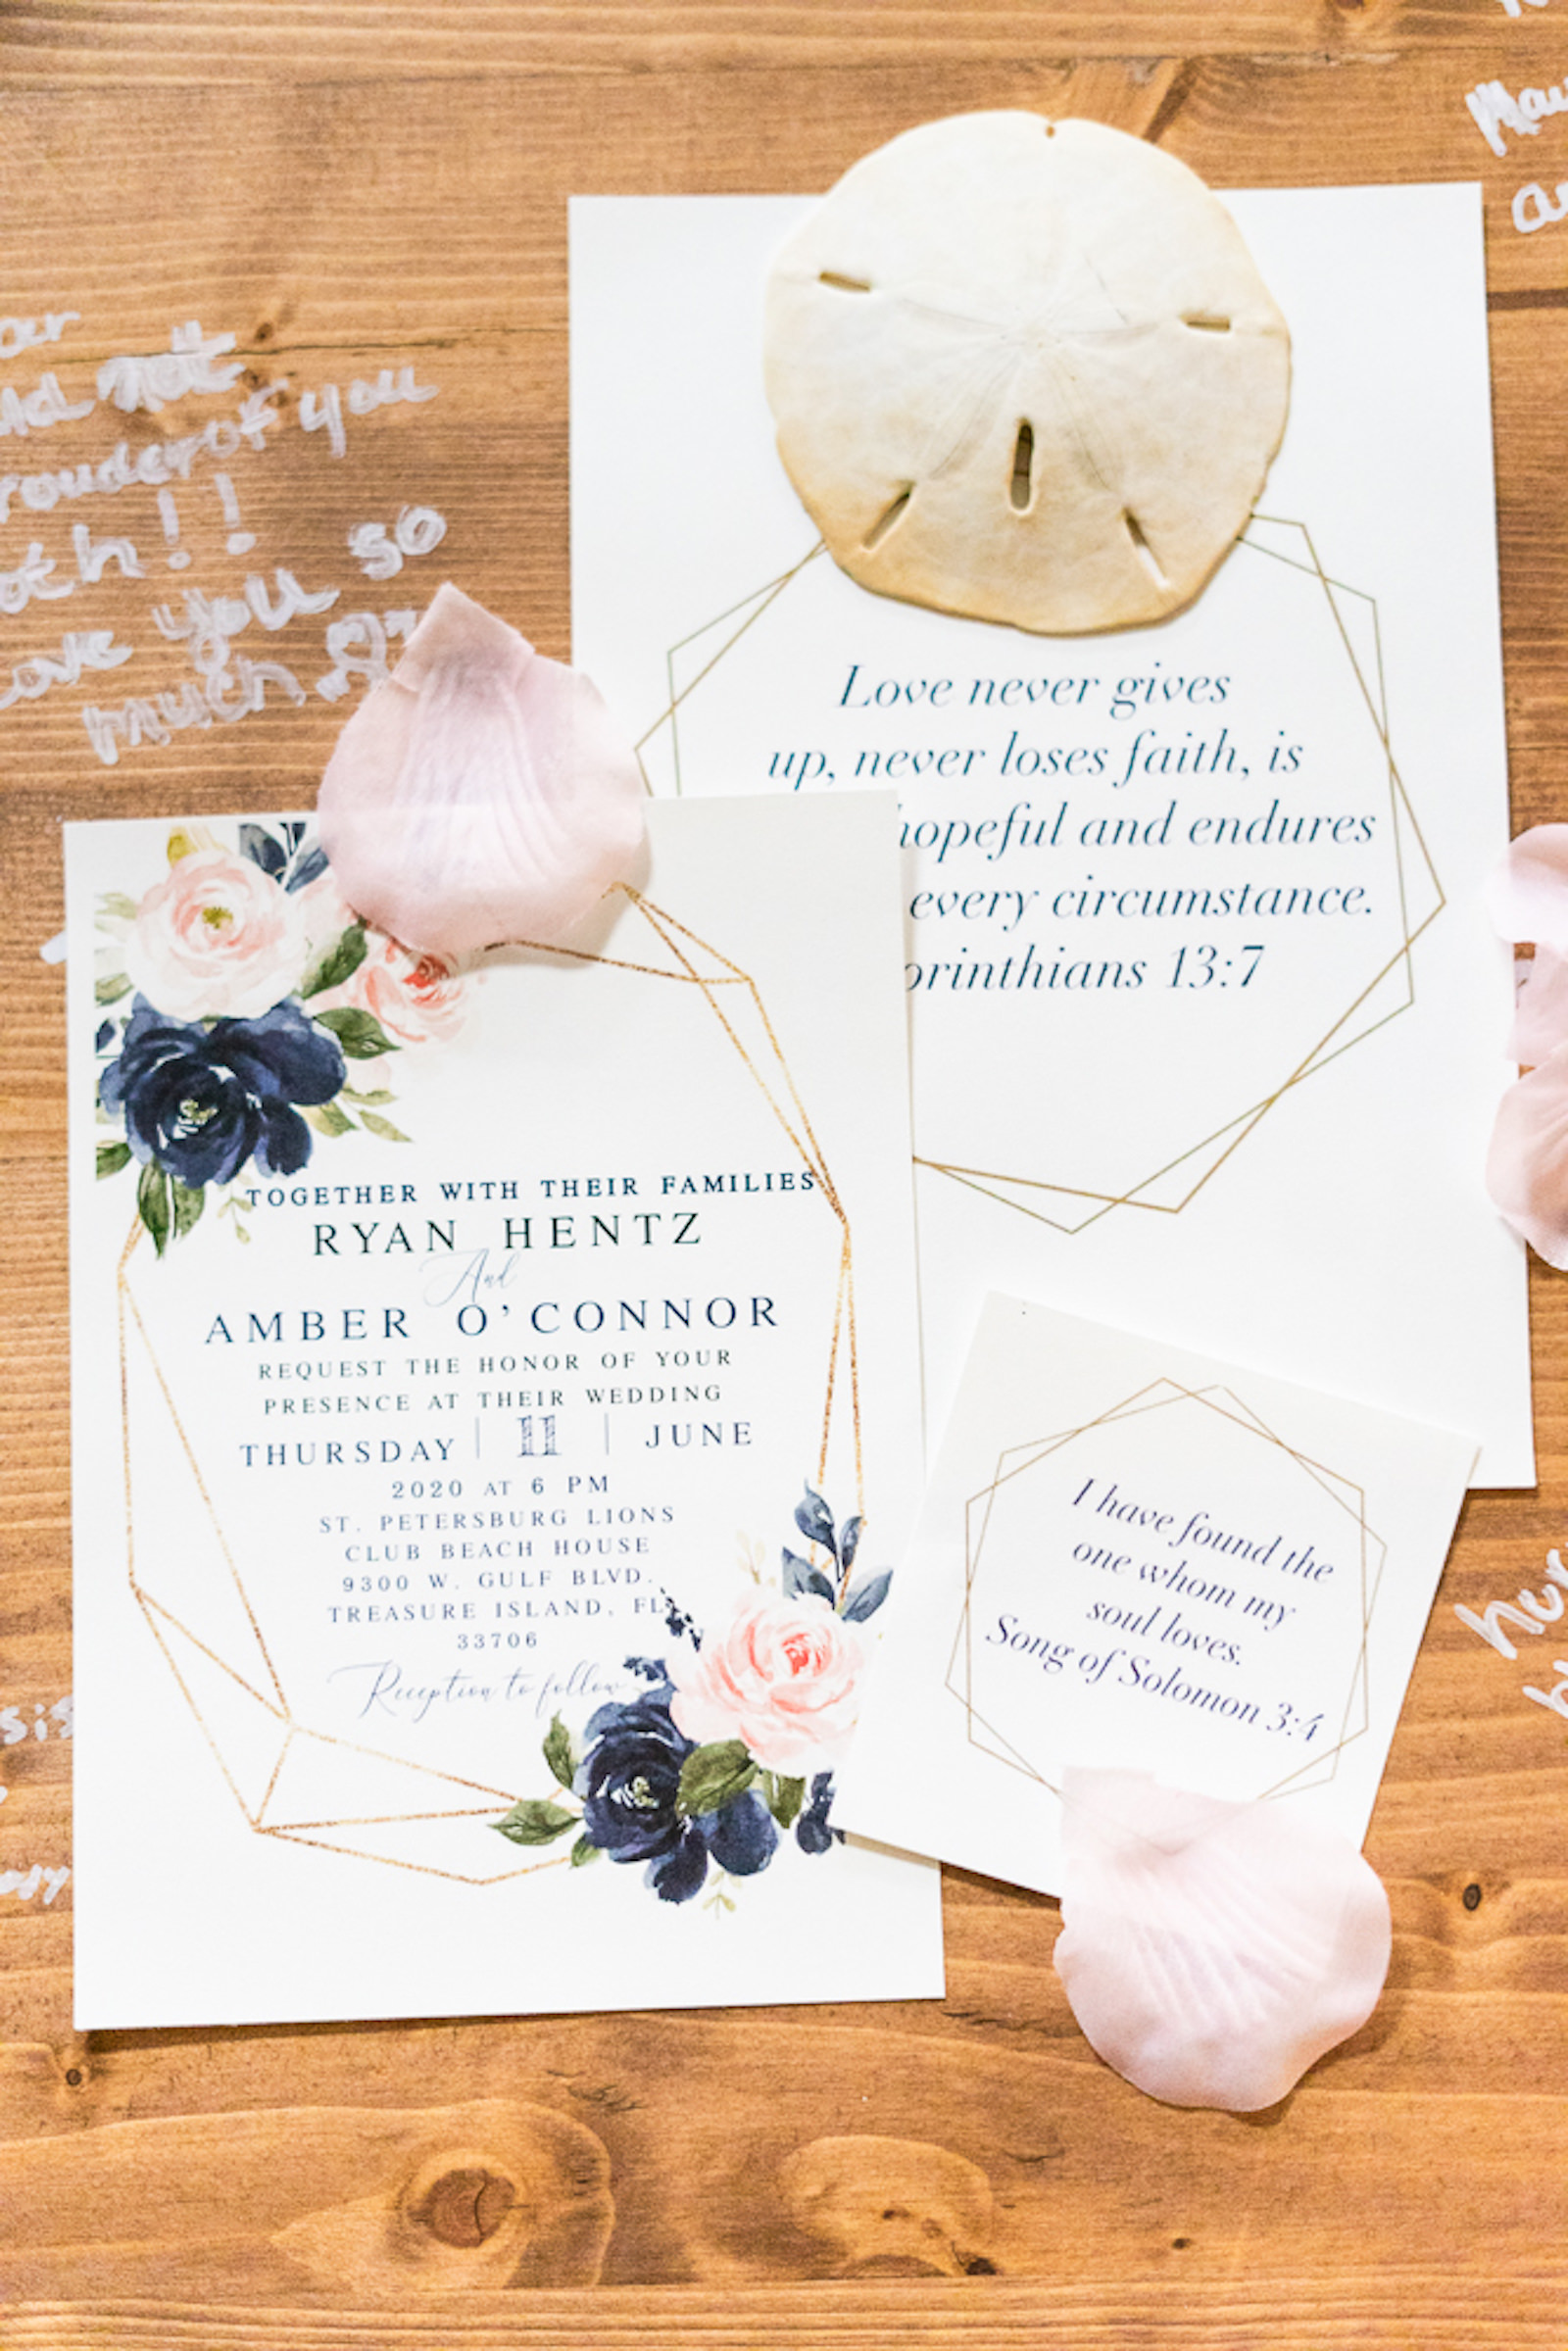 St. Petersburg Florida Wedding | Navy Blue and Blush Pink Floral Wedding Invitation with Gold Geometric Motif and Bible Verse | Wedding Stationery Set Flay Lay with Sand Dollar